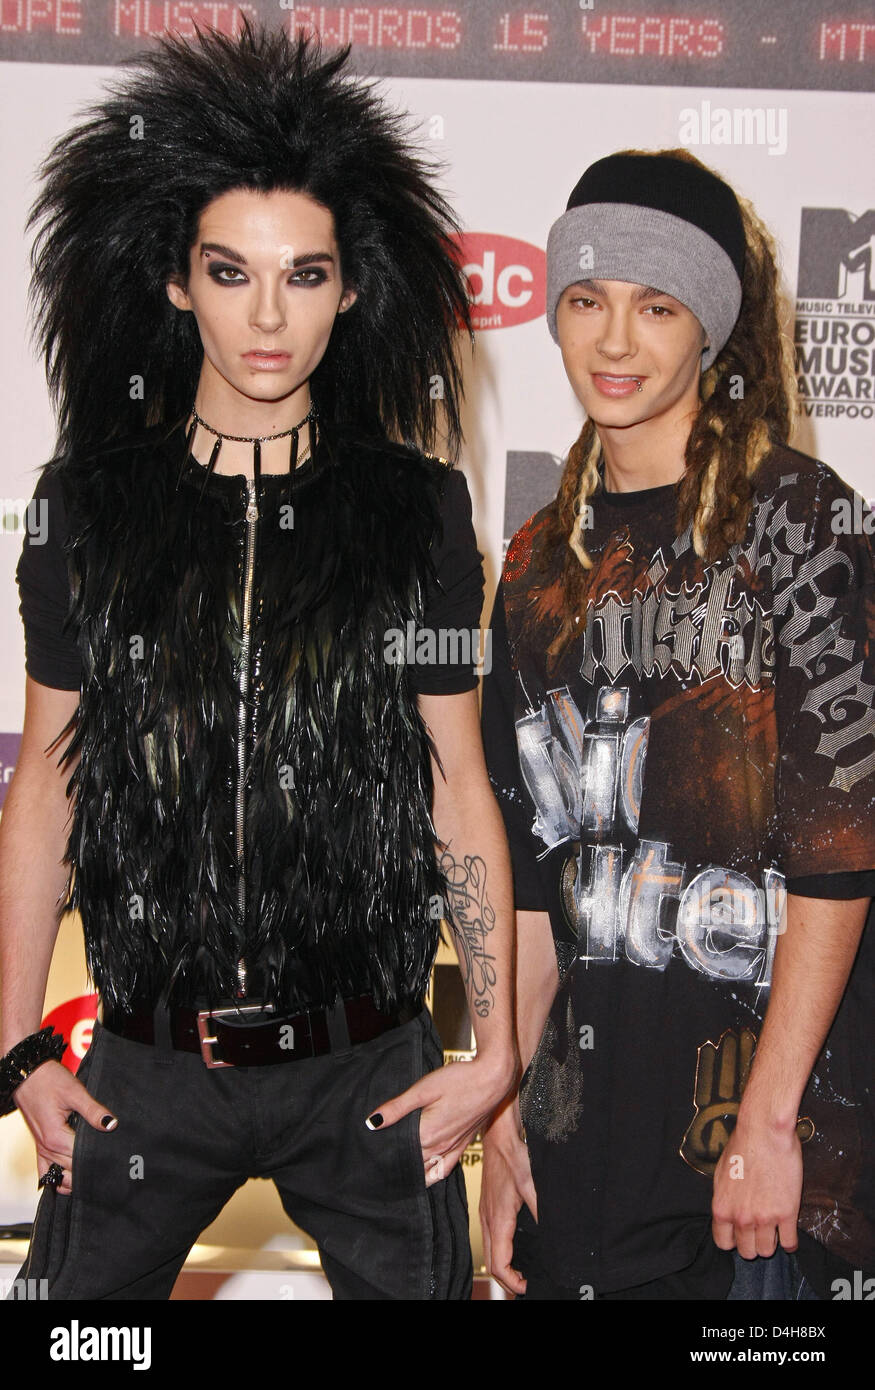 Bill (L) and Tom Kaulitz of Tokio Hotel arrive for the 15th MTV Europe Music Awards at Echo Arena in Liverpool, United Kingdom, 06 November 2008. Photo: Hubert Boesl Stock Photo